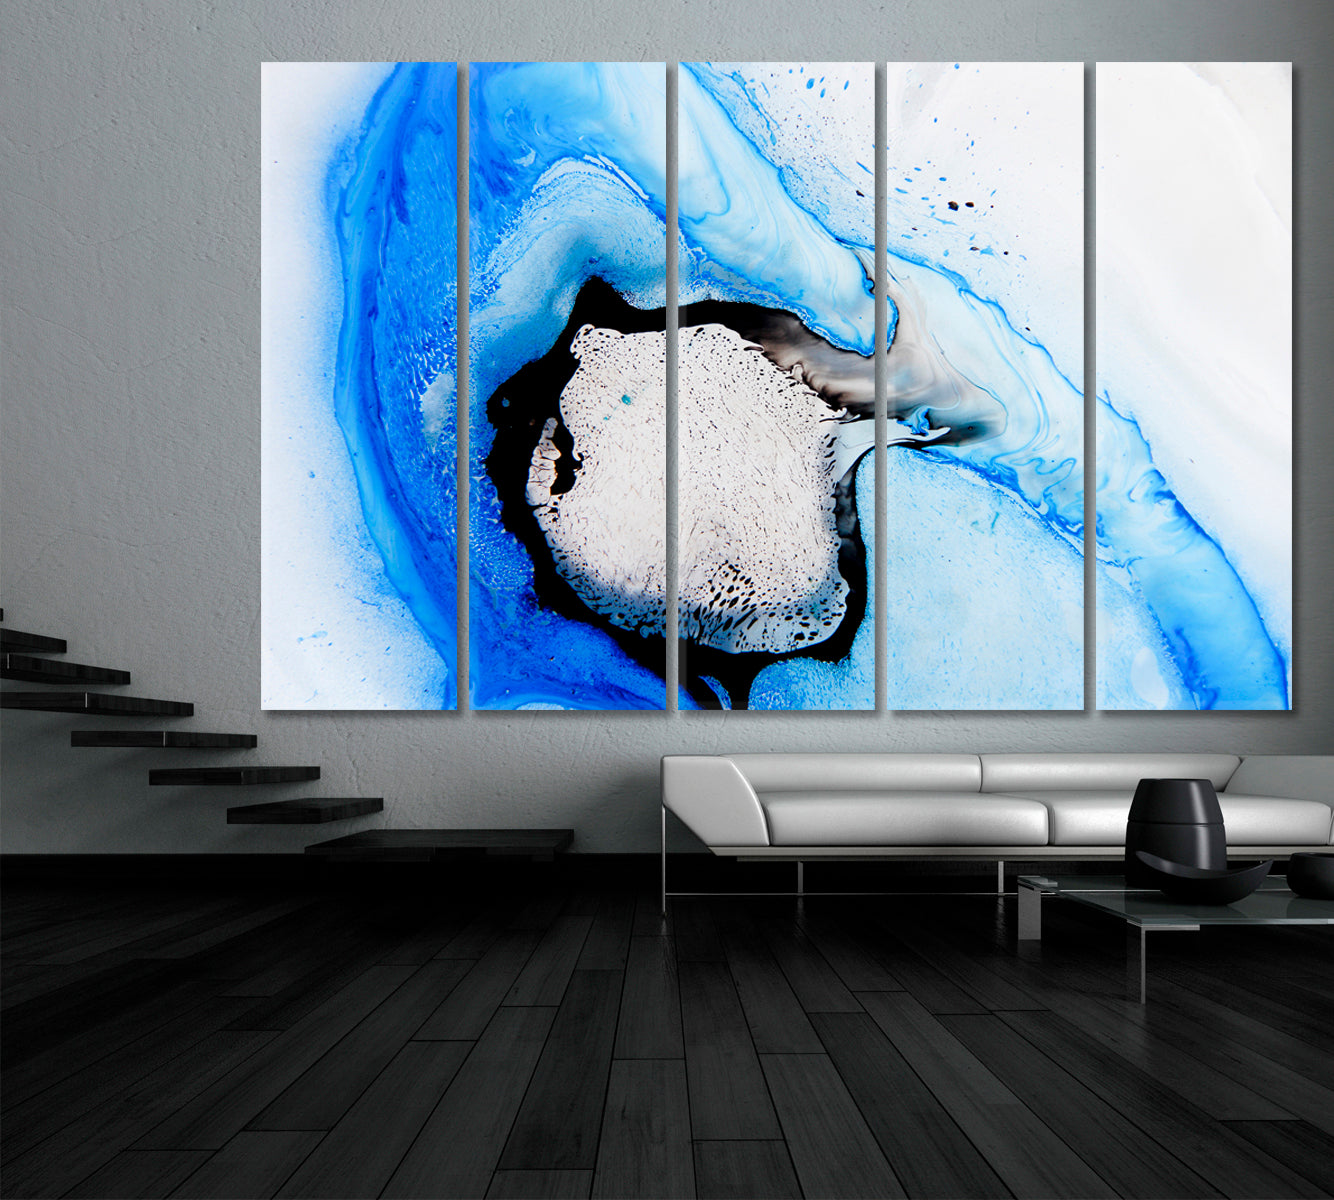 OIL STAINS Beautiful Abstract Dark Blue Mixed Acrylic Marble Fluid Art, Oriental Marbling Canvas Print Artesty 5 panels 36" x 24" 